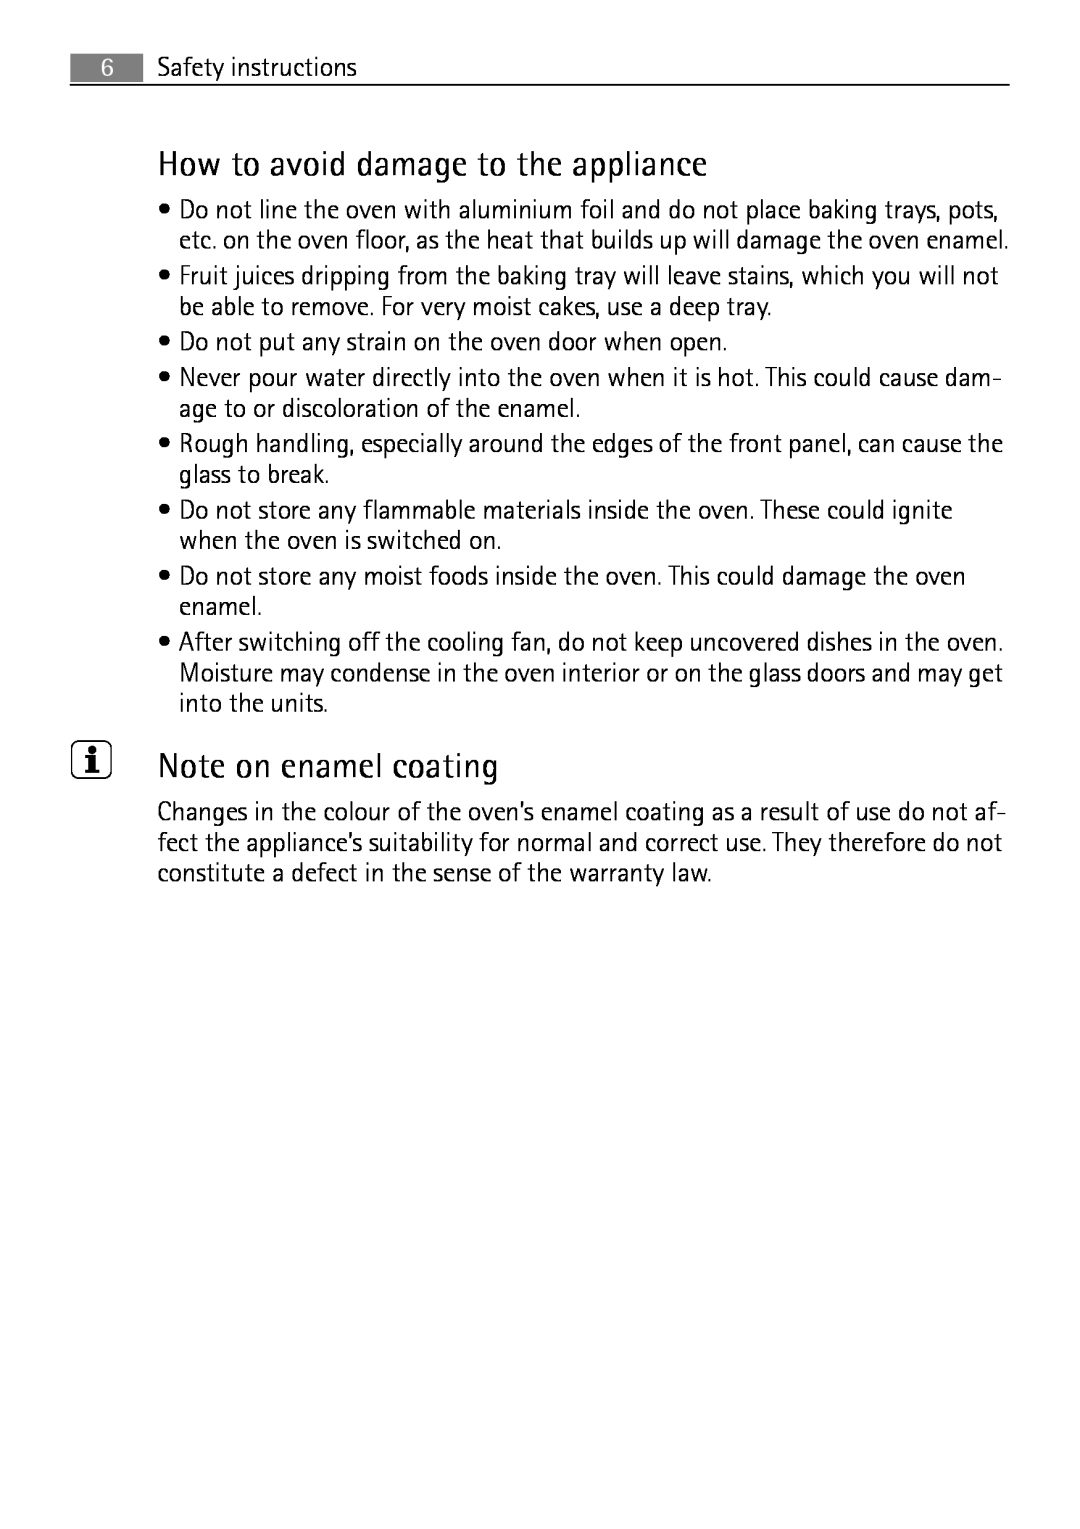 Electrolux E43012-5 user manual How to avoid damage to the appliance, Note on enamel coating 